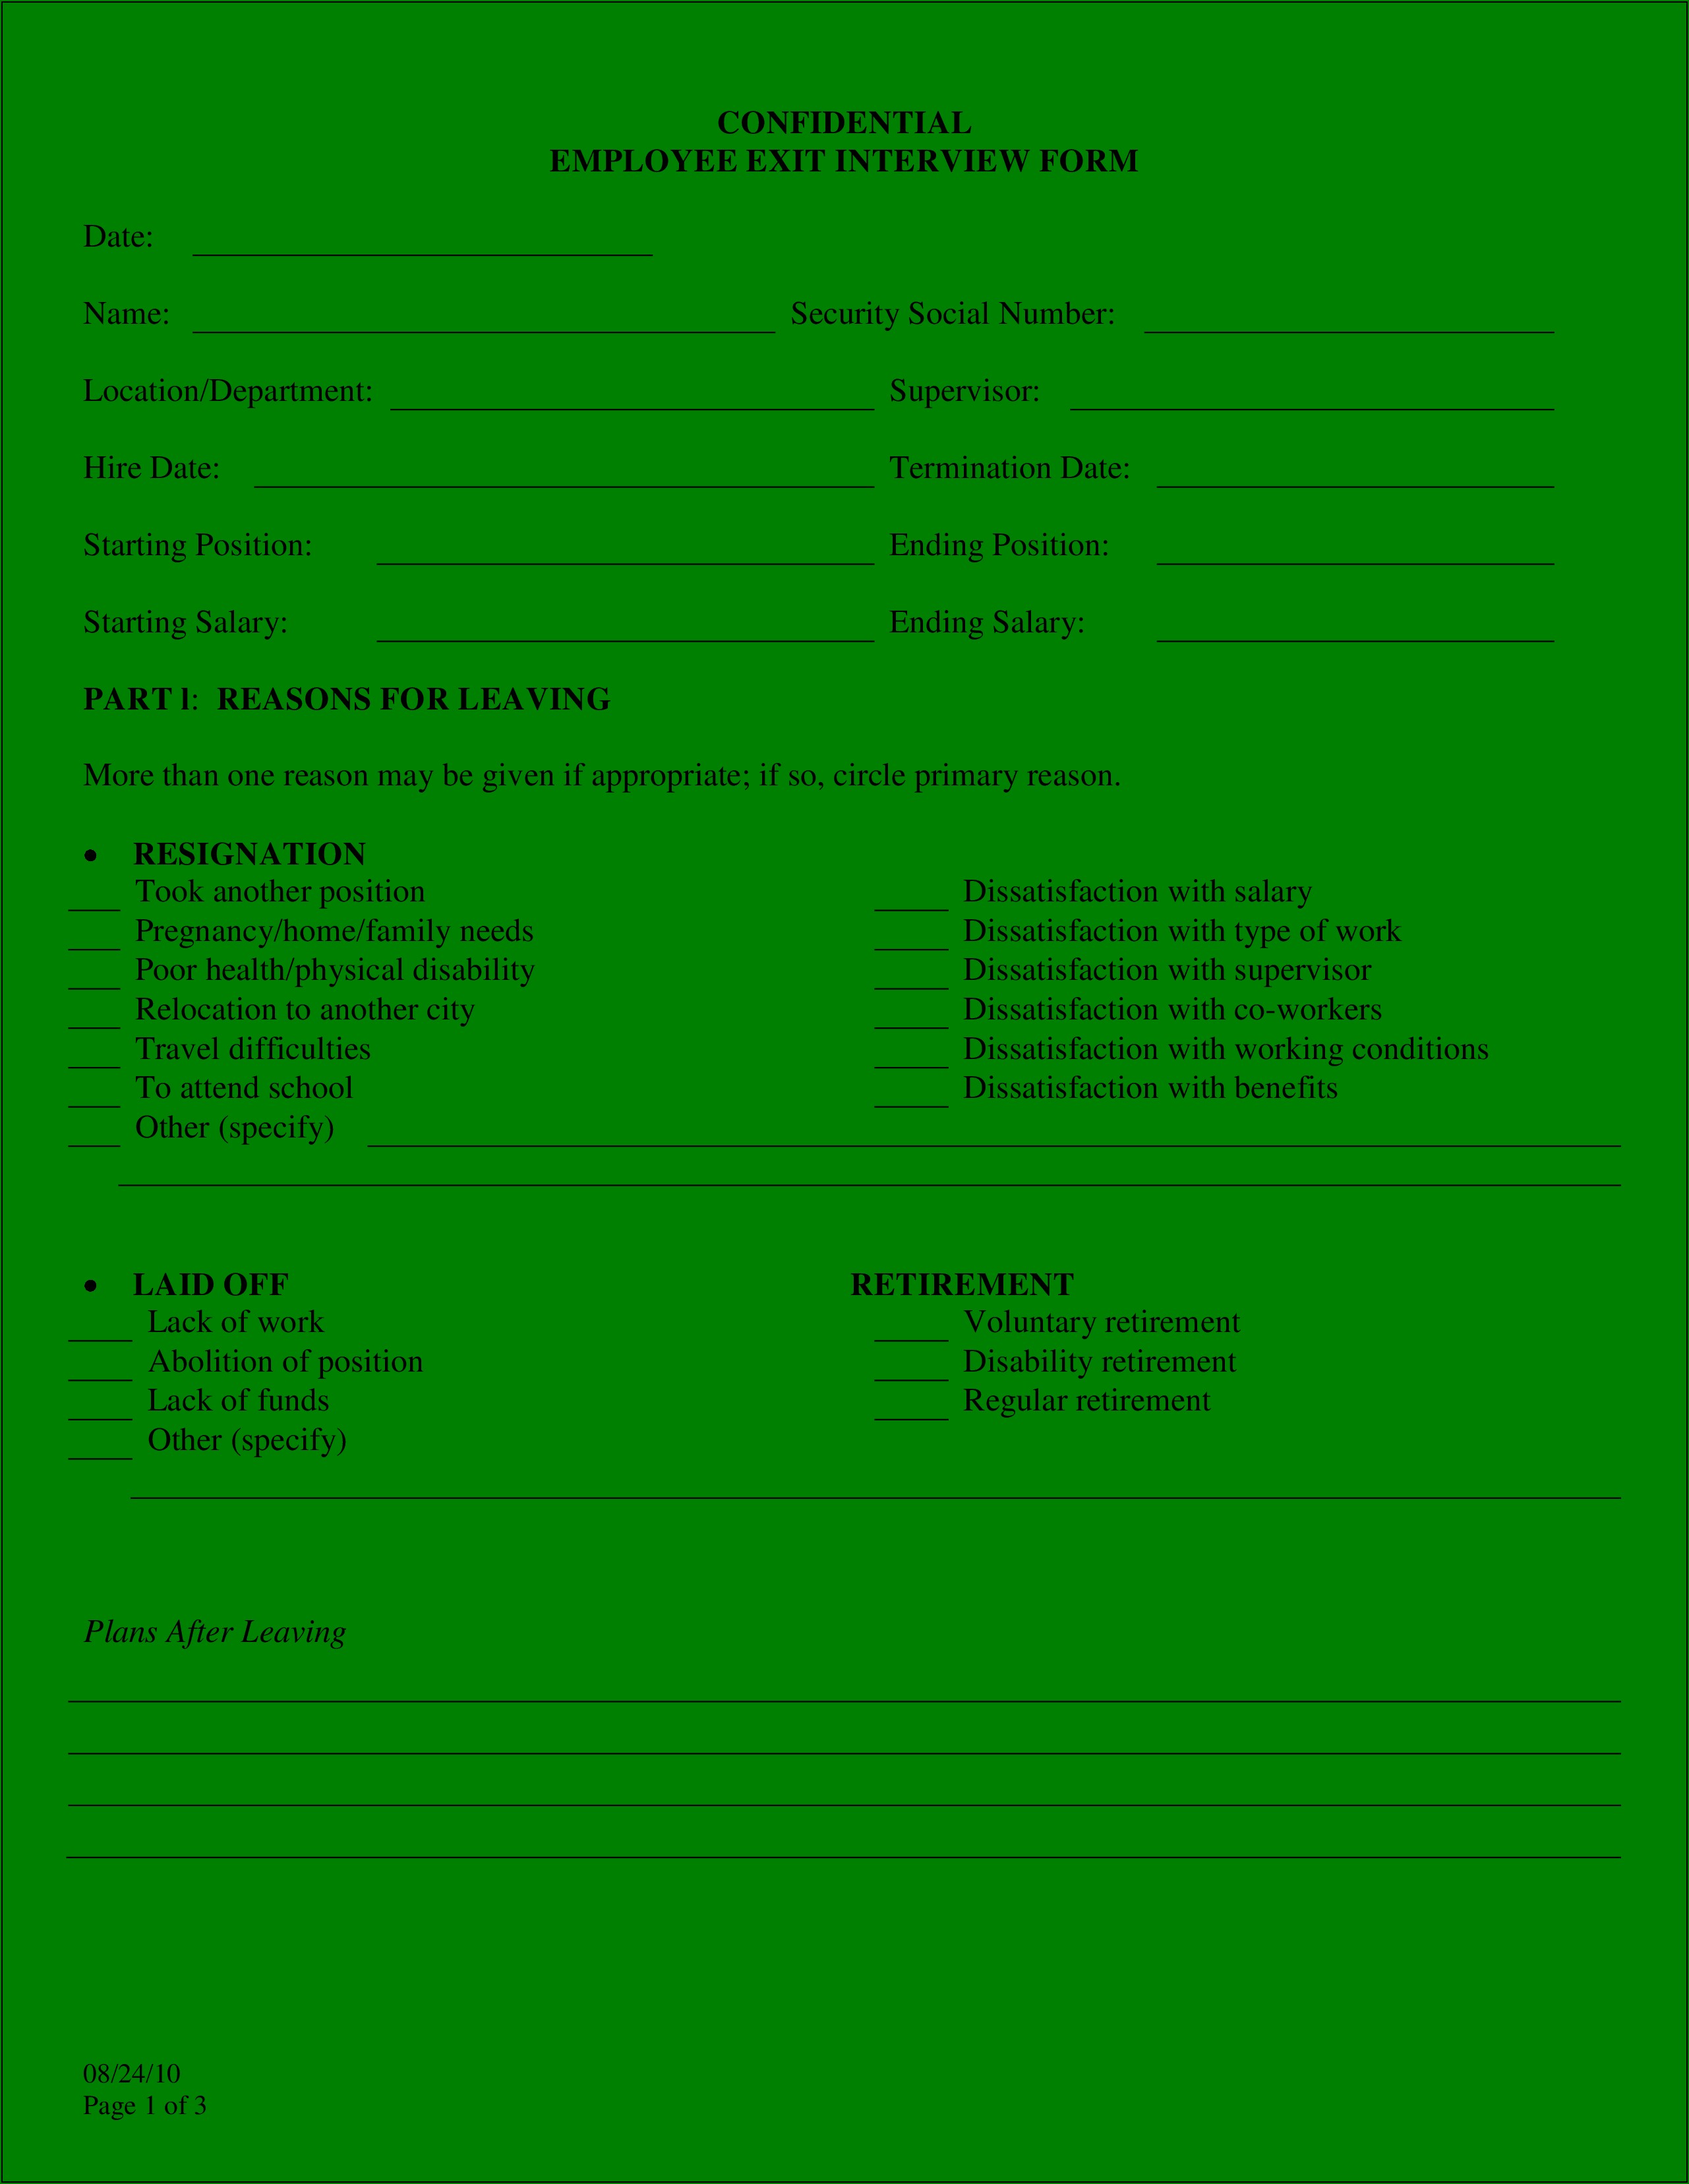 Examples Of Exit Interview Forms